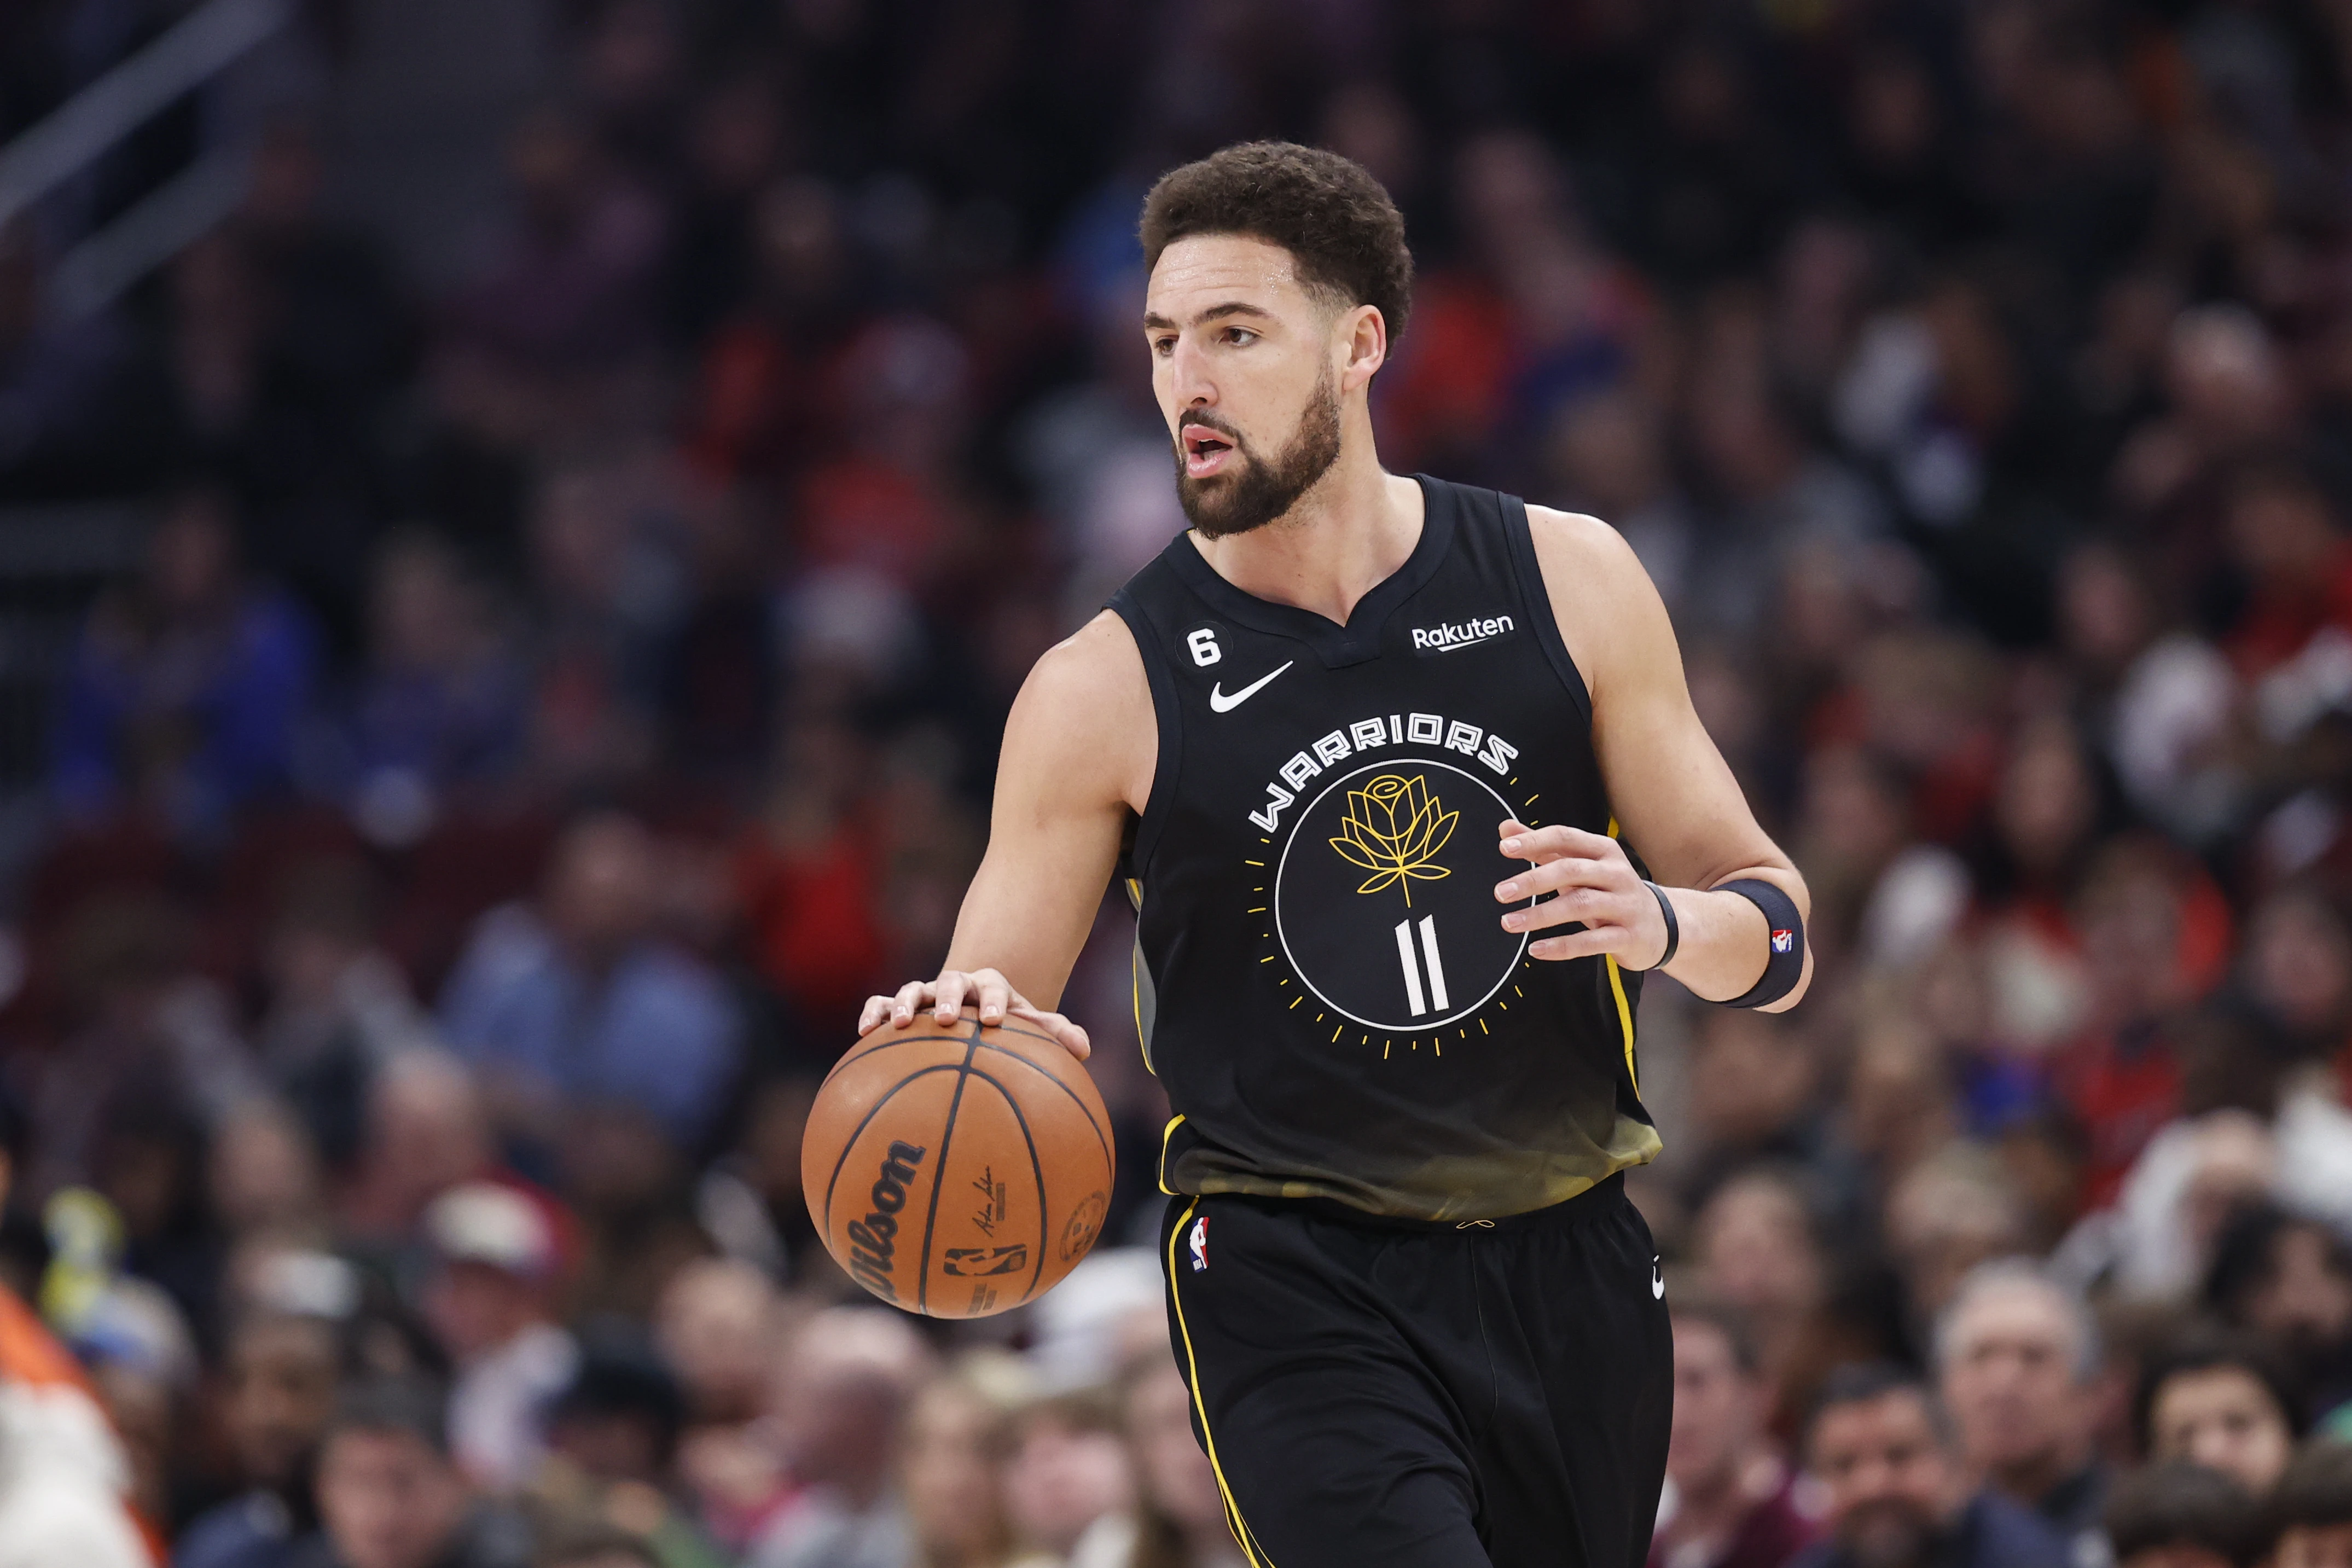 Golden State Warriors guard Klay Thompson (11) brings the ball up court against the Chicago Bulls during the first half of an NBA game at United Center.